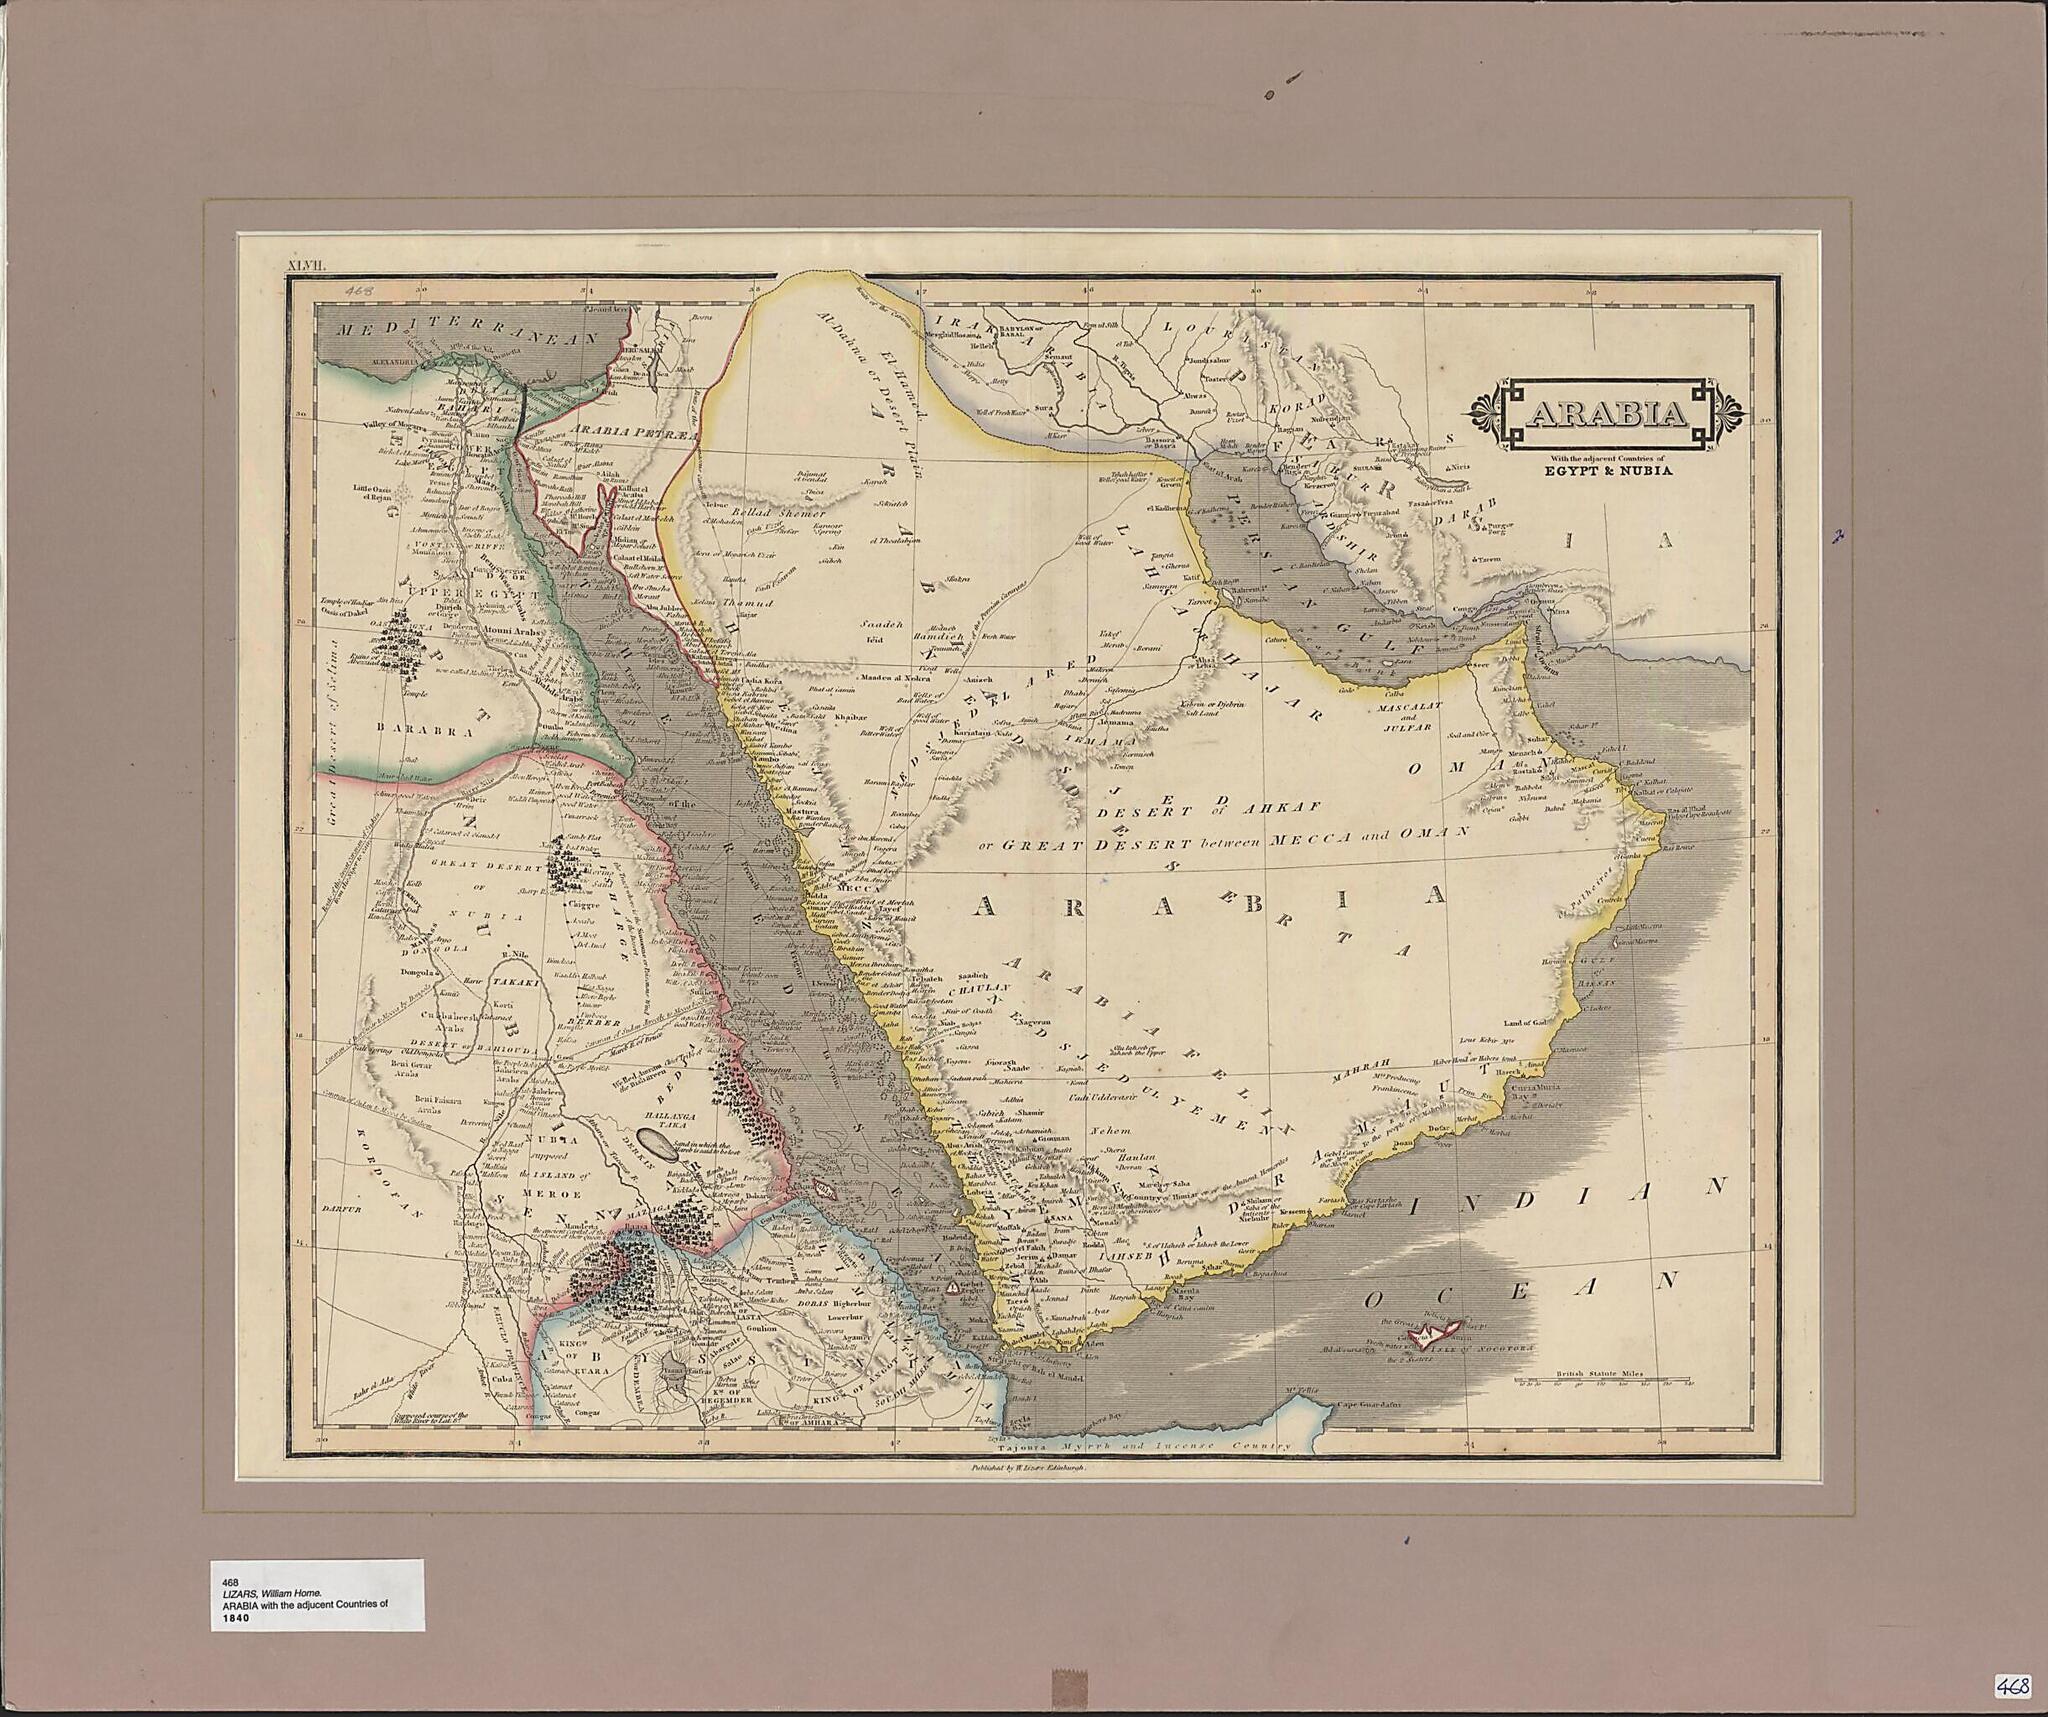 This old map of Arabia: With the Adjacent Countries of Egypt and Nubia. (Arabia : With the Adjacent Countries of Egypt &amp; Nubia) from 1831 was created by Daniel Lizars, W.H. (William Home) Lizars in 1831